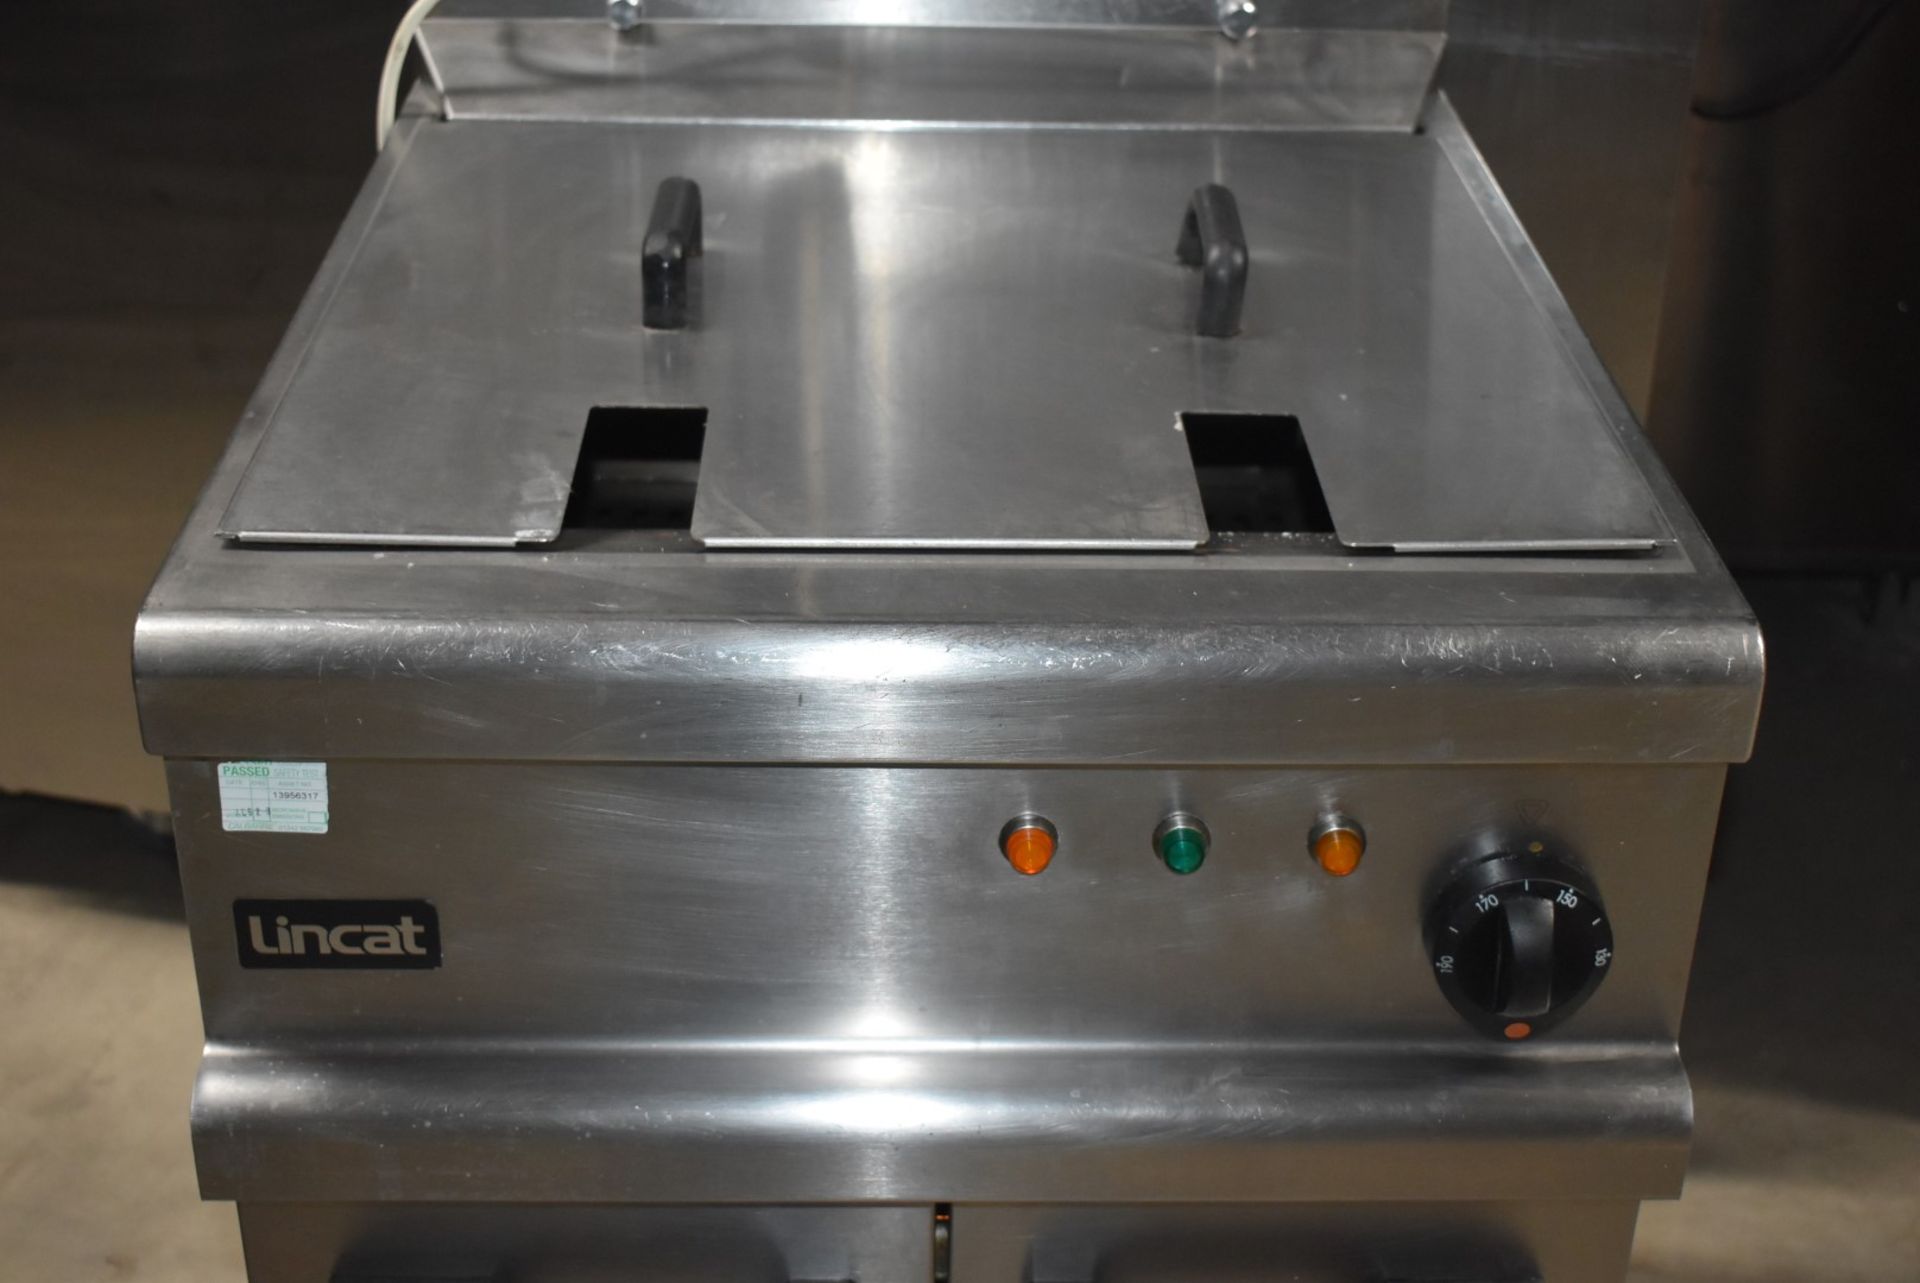 1 x Lincat Opus 700 Single Tank Electric Fryer With Built In Filtration - 3 Phase - Approx RRP £3, - Image 16 of 19